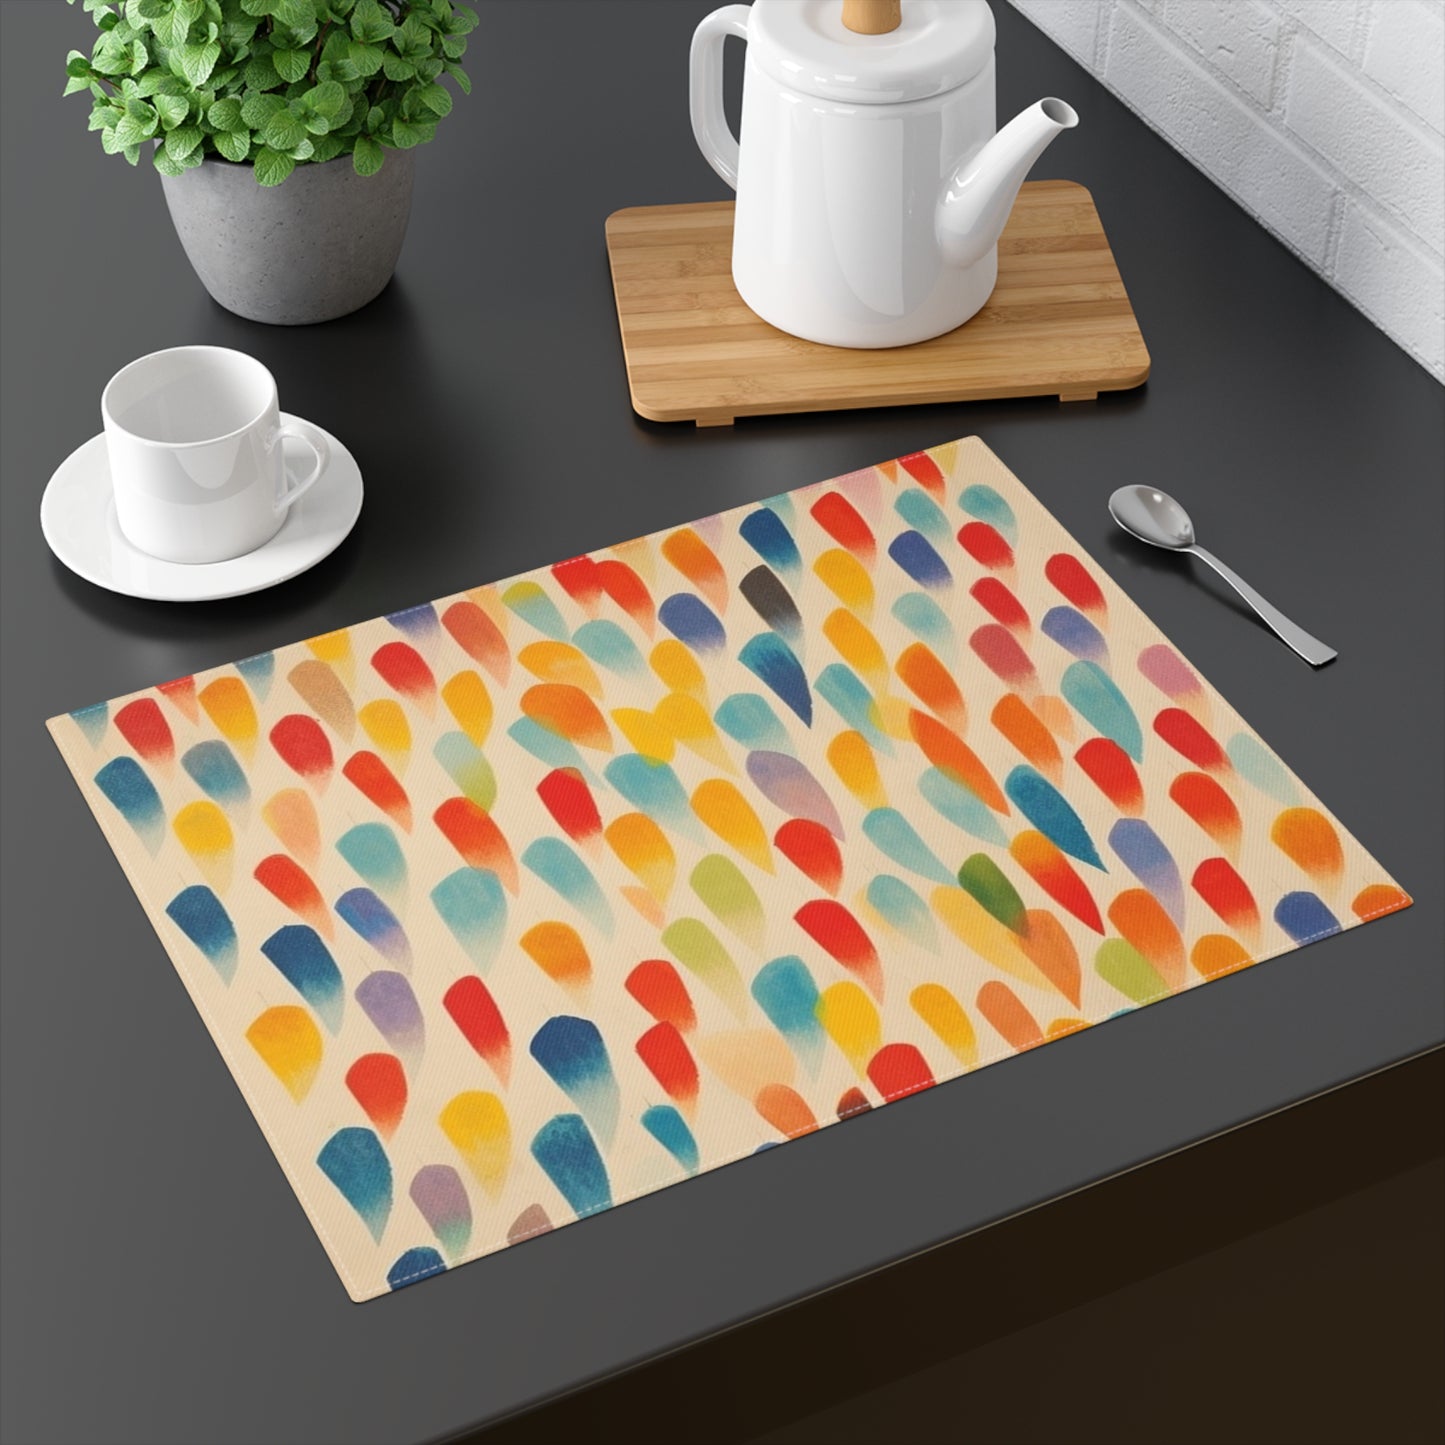 Vibrant Shapes Unleashed: Artistic Placemat Inspired by Ellsworth Kelly